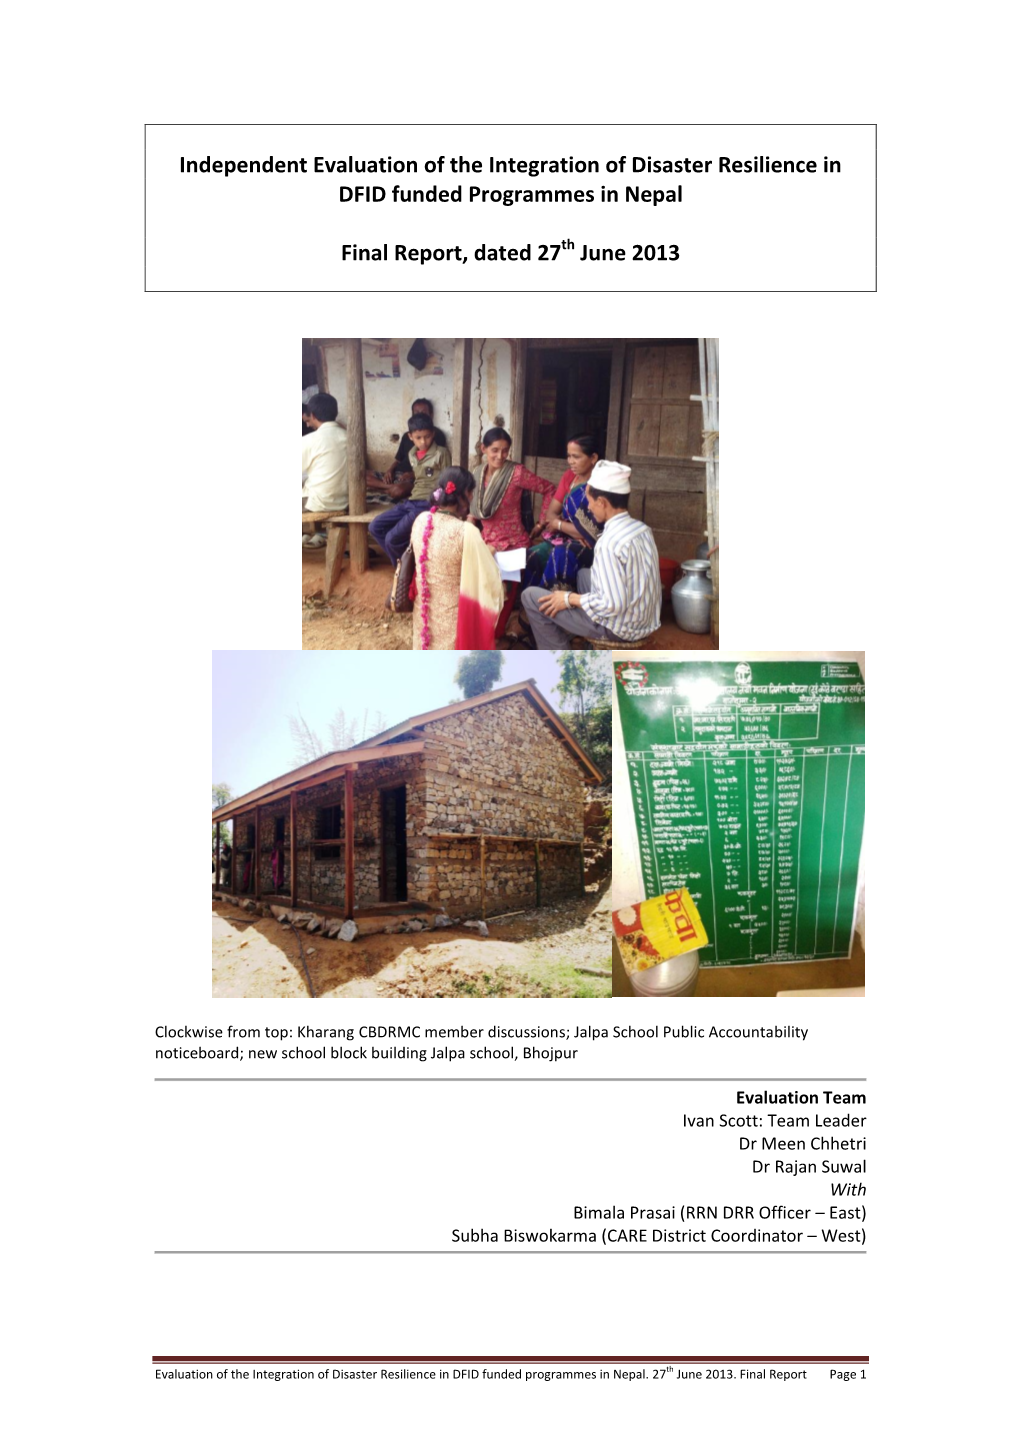 Independent Evaluation of the Integration of Disaster Resilience in DFID Funded Programmes in Nepal